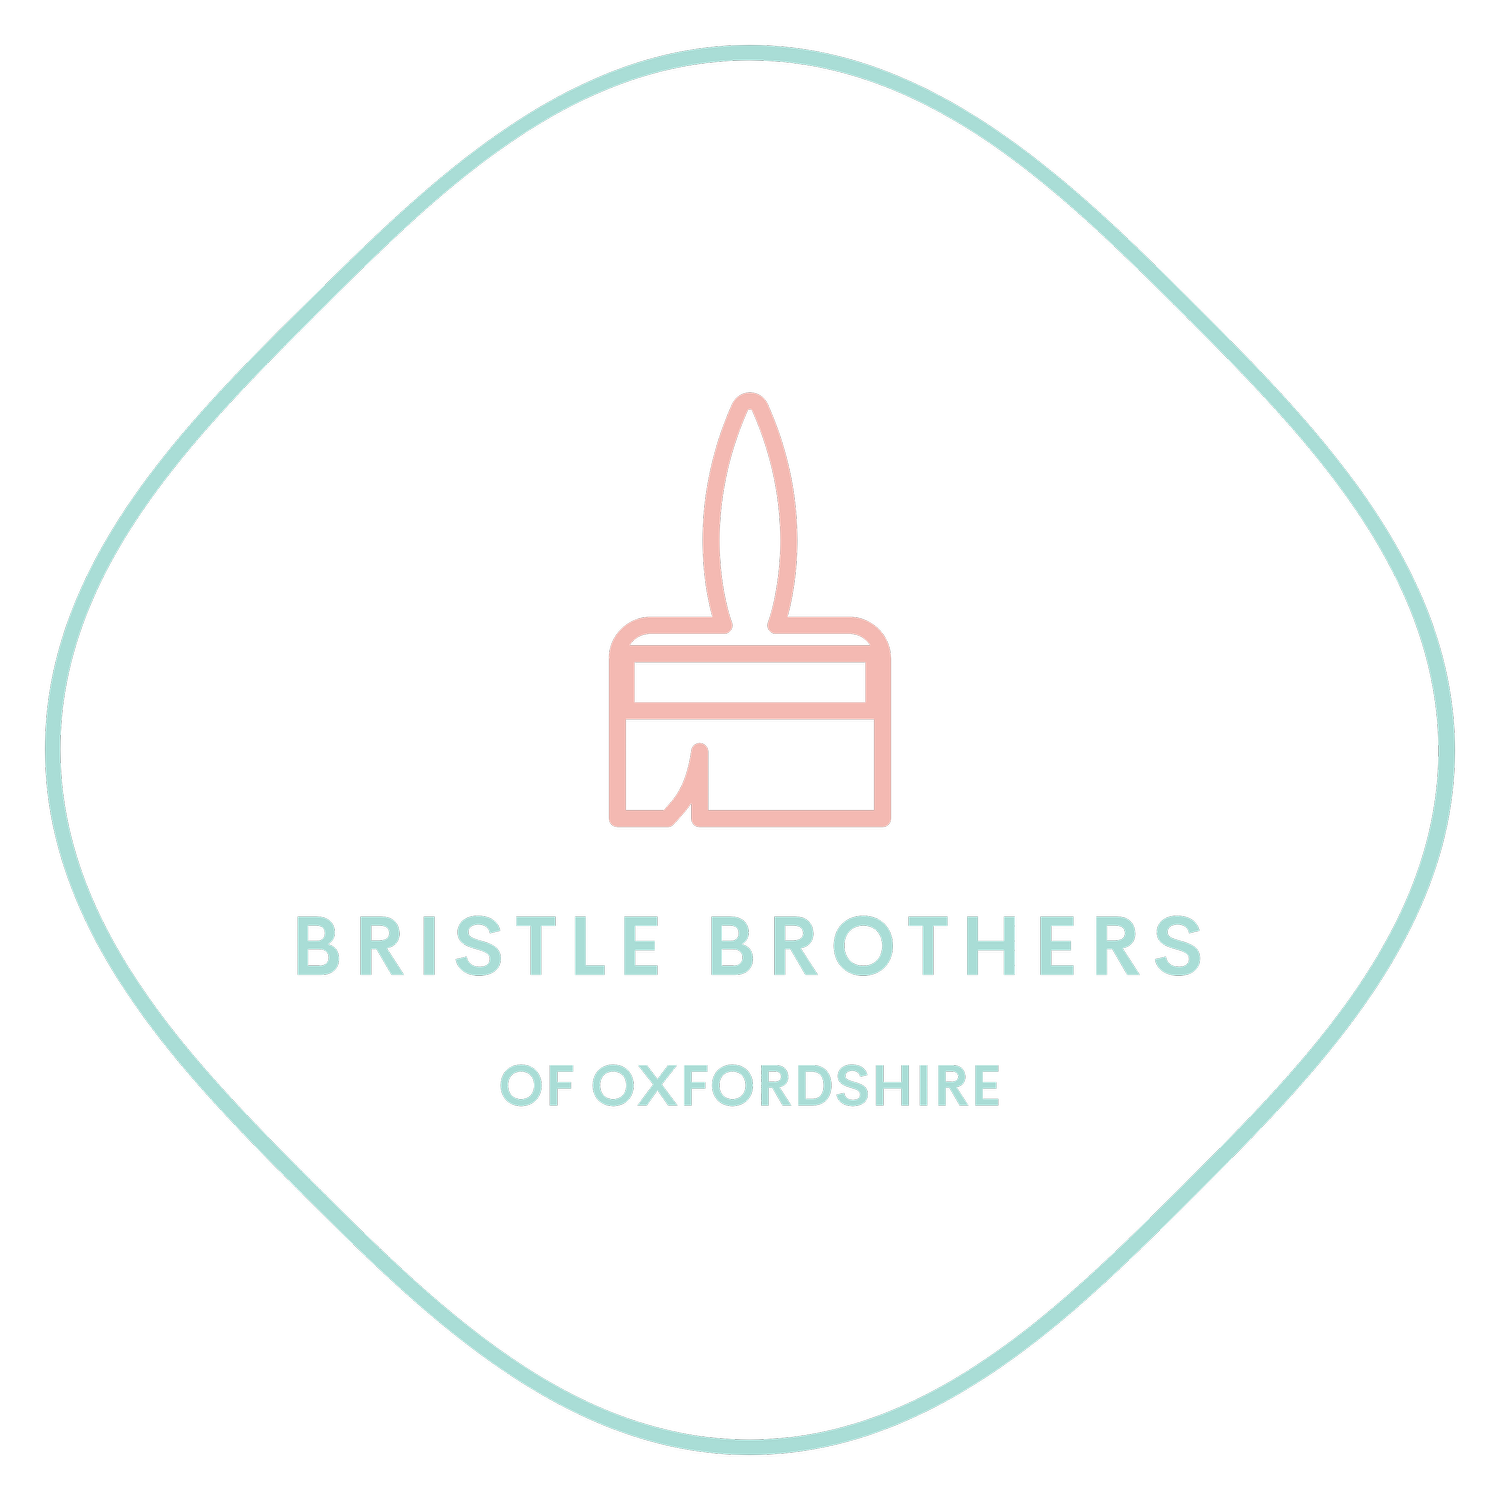 Bristle Brothers of Oxfordshire